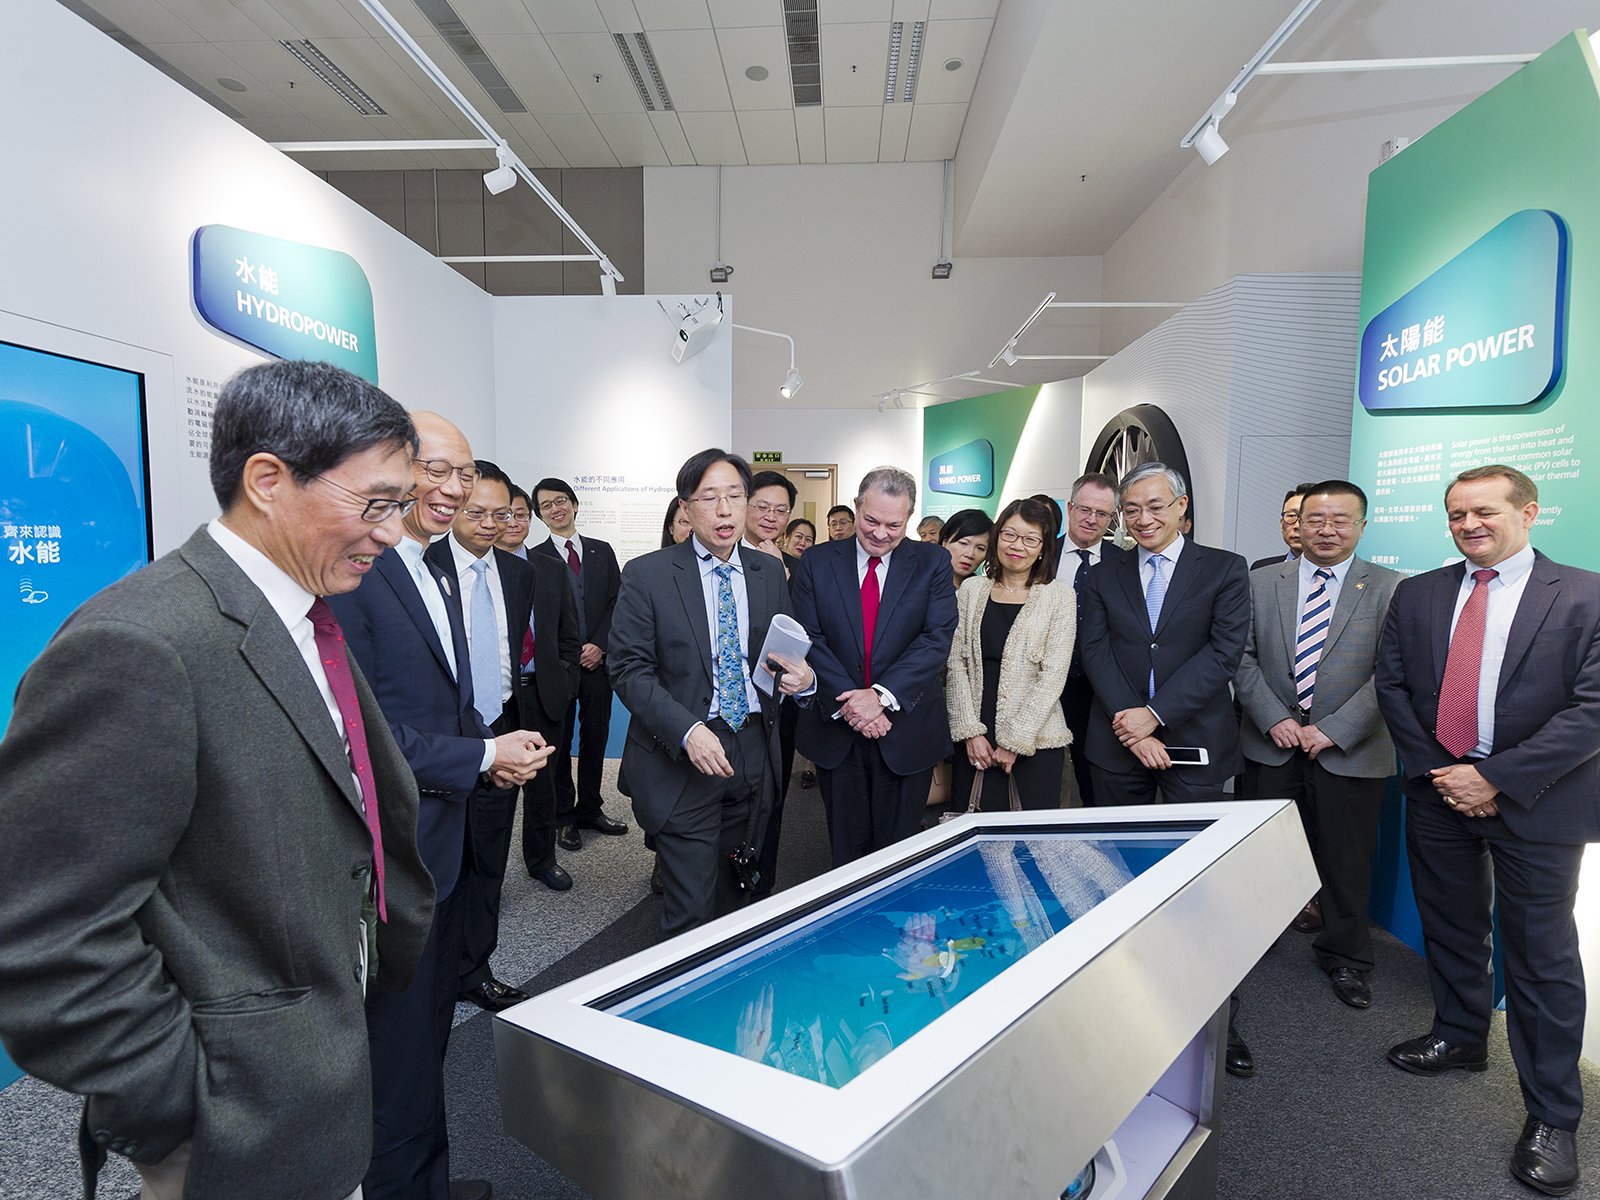 The guests visit the Low Carbon Energy Education Centre and are impressed by the interactive exhibits.